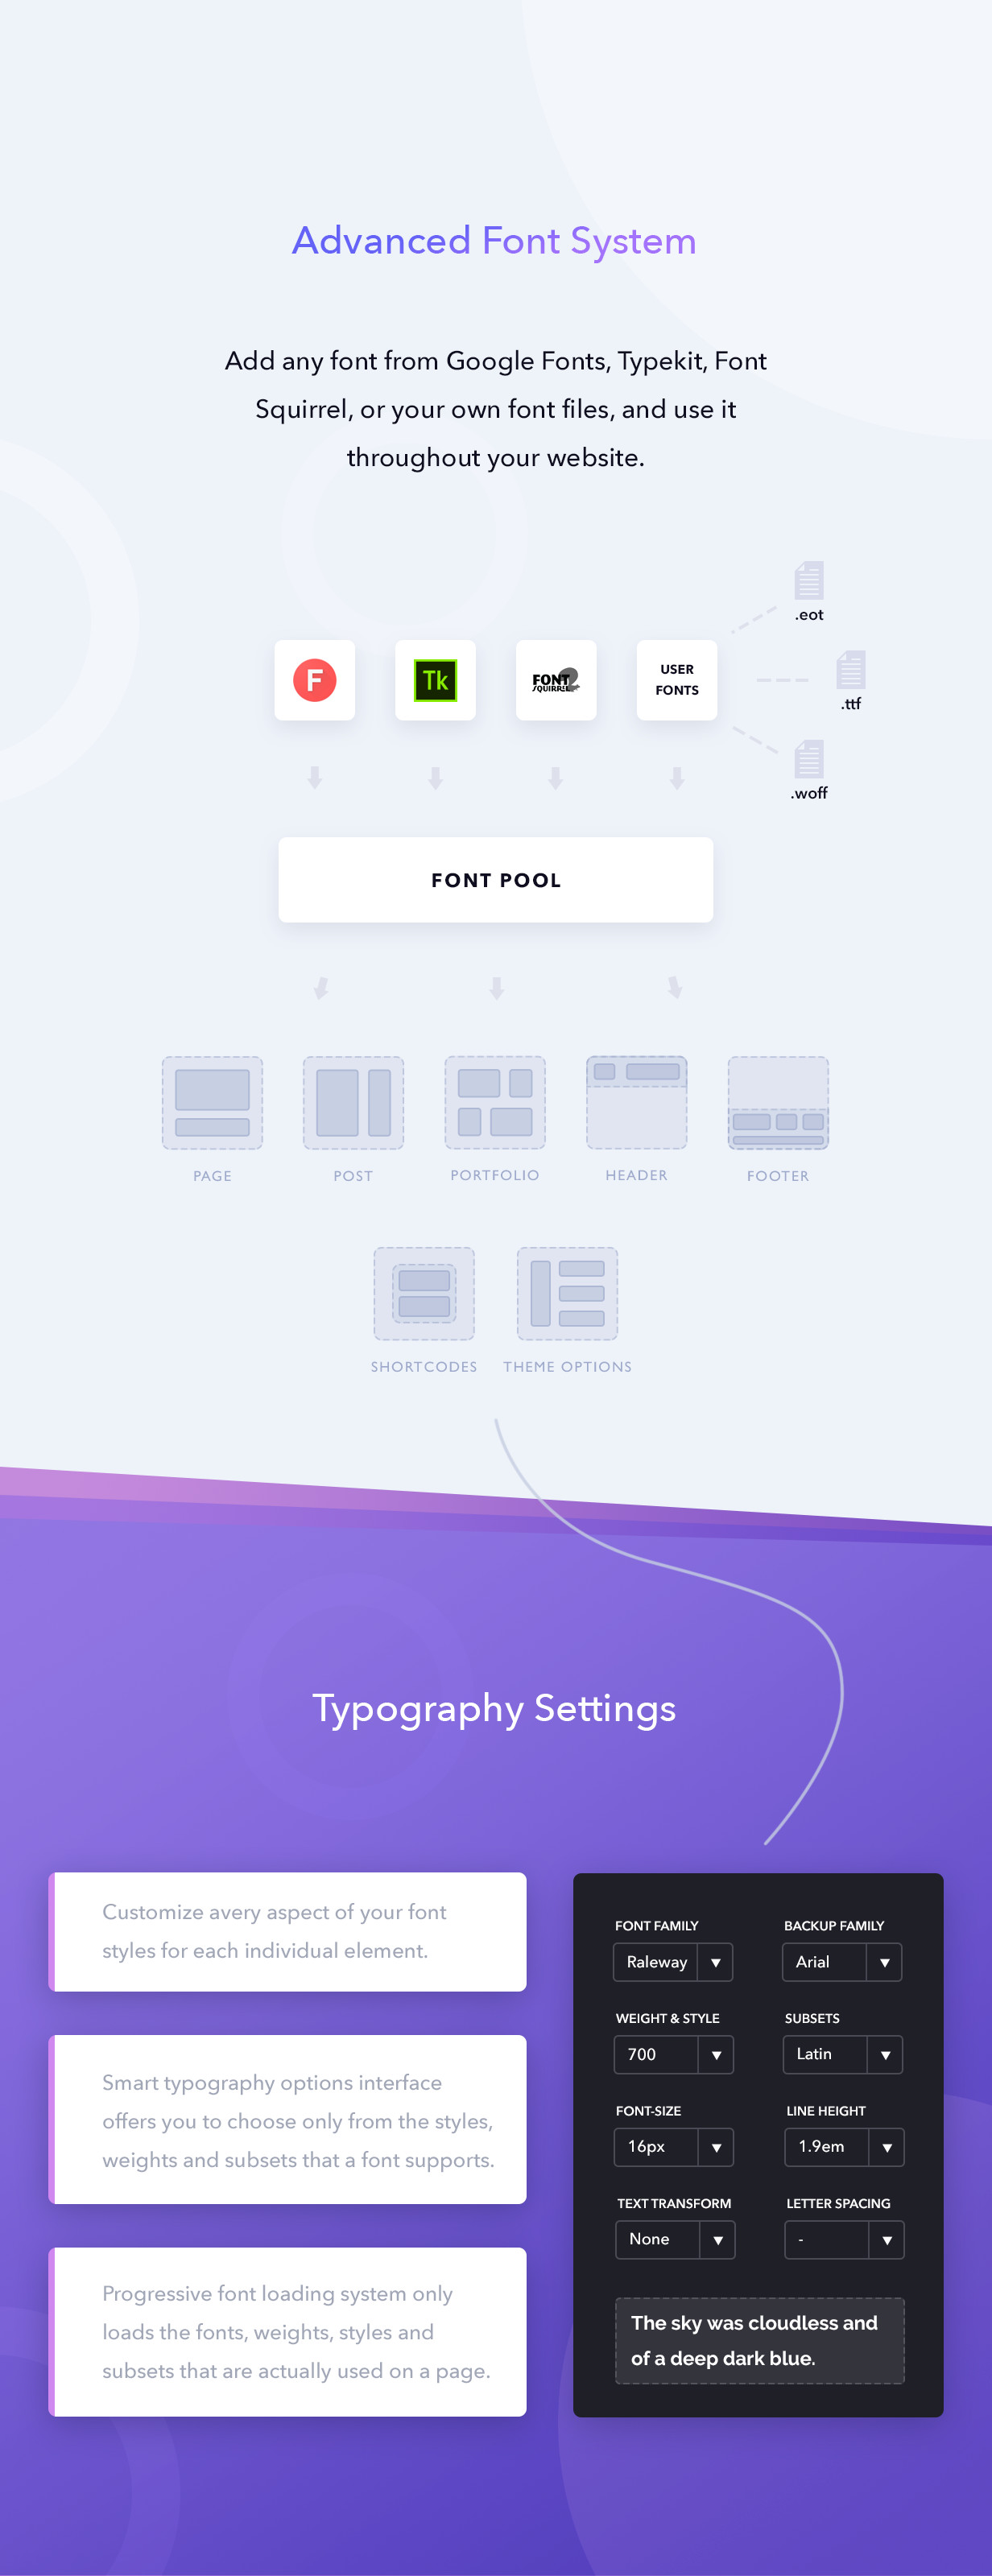 Advanced font system and typography